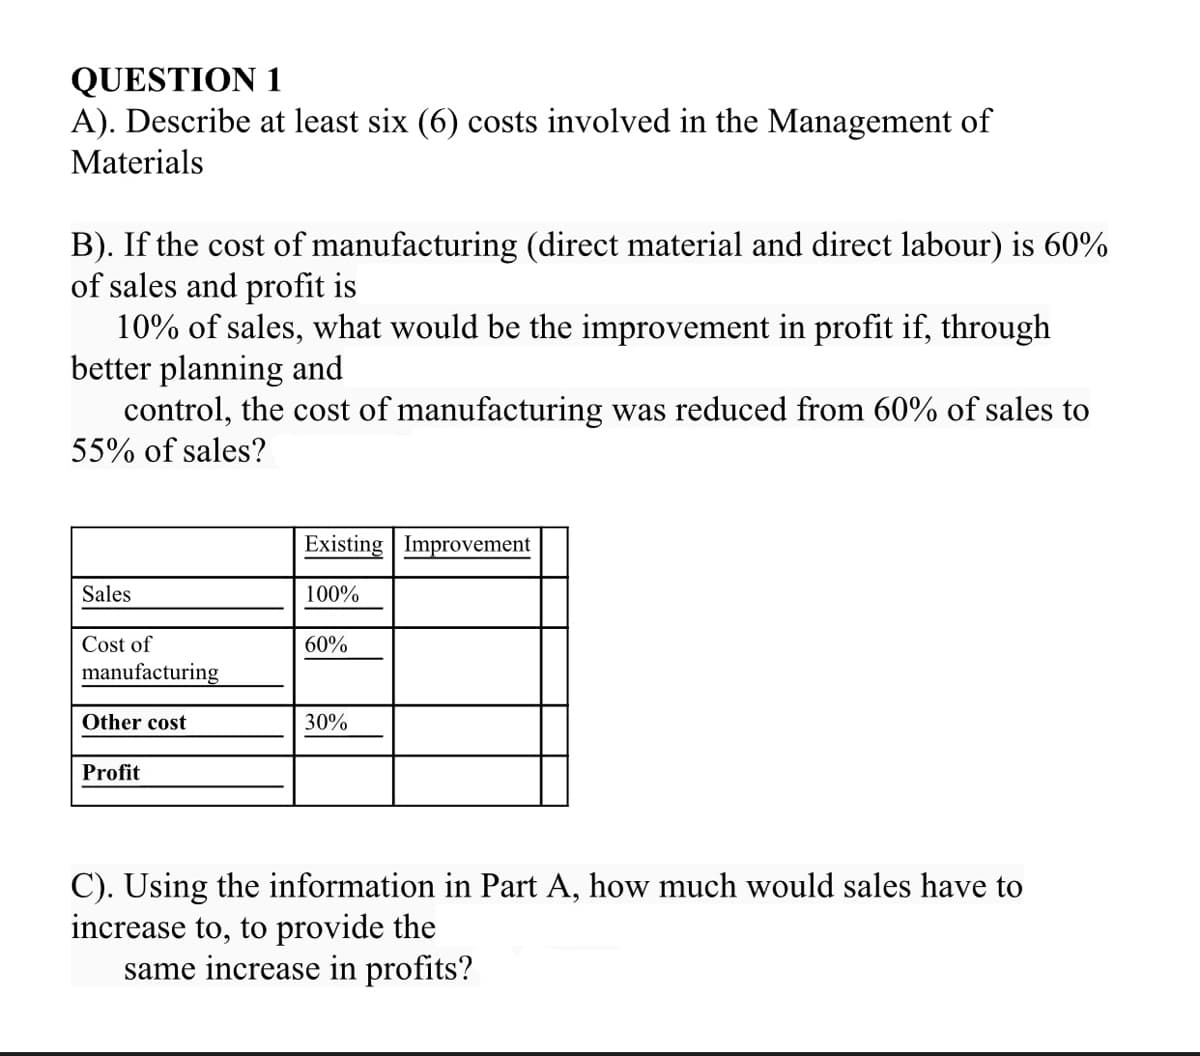 QUESTION 1
A). Describe at least six (6) costs involved in the Management of
Materials
B). If the cost of manufacturing (direct material and direct labour) is 60%
of sales and profit is
10% of sales, what would be the improvement in profit if, through
better planning and
control, the cost of manufacturing was reduced from 60% of sales to
55% of sales?
Existing Improvement
Sales
100%
Cost of
60%
manufacturing
Other cost
30%
Profit
C). Using the information in Part A, how much would sales have to
increase to, to provide the
same increase in profits?
